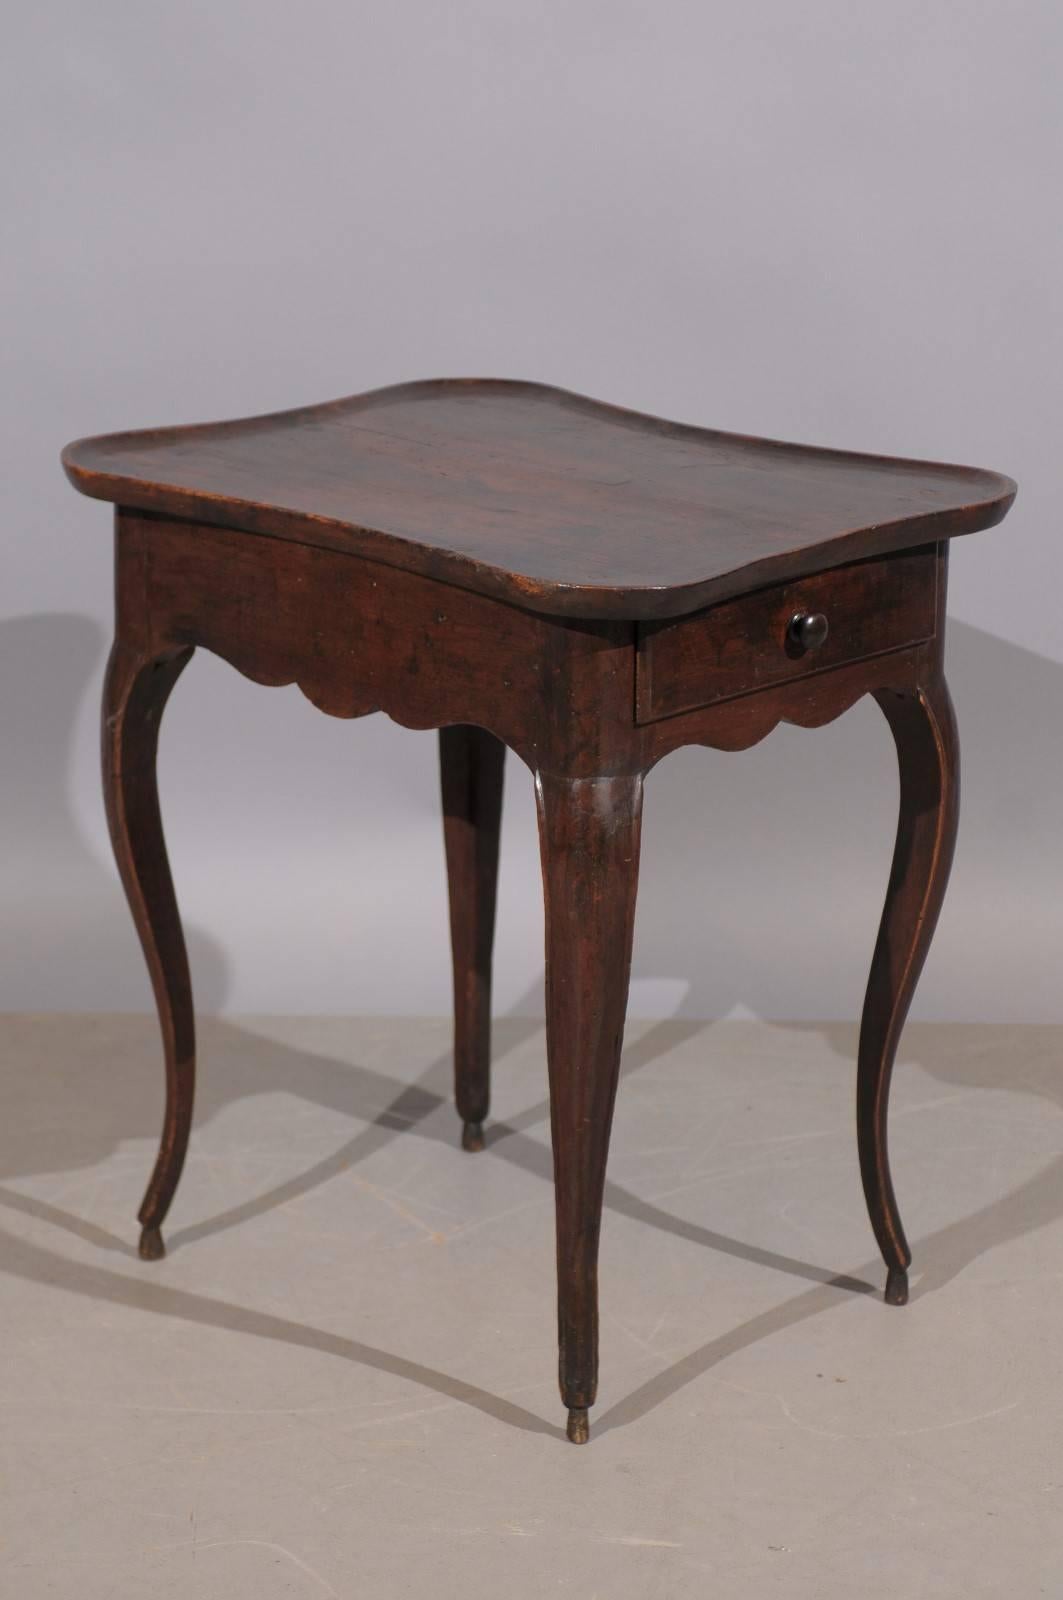 18th century French walnut table with shaped dish top and drawer.